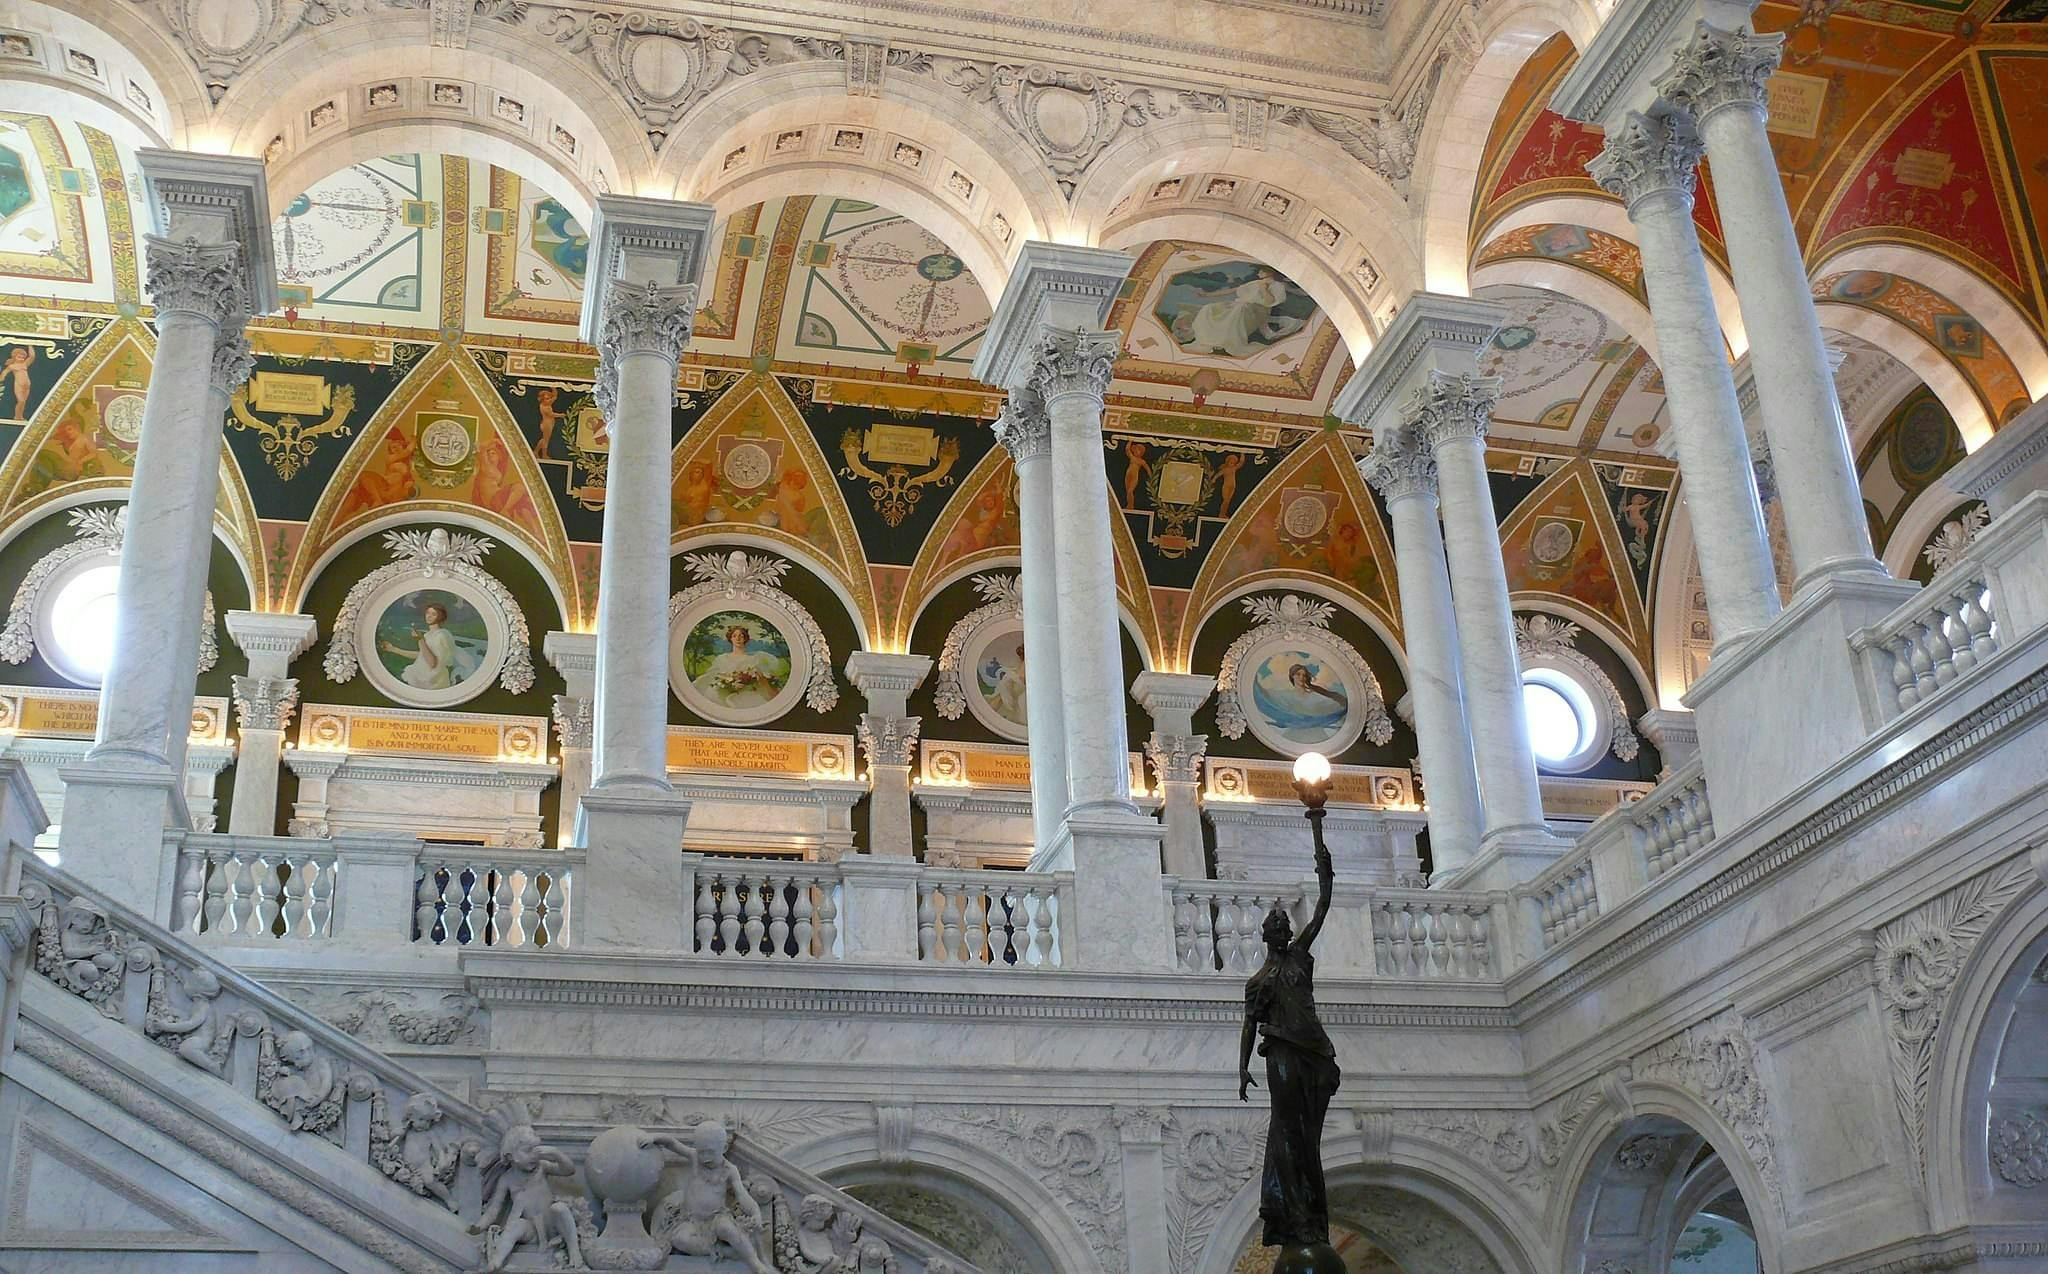 Library of Congress - Ad Meskens CC BY-SA 3.0 via Wikimedia Commons